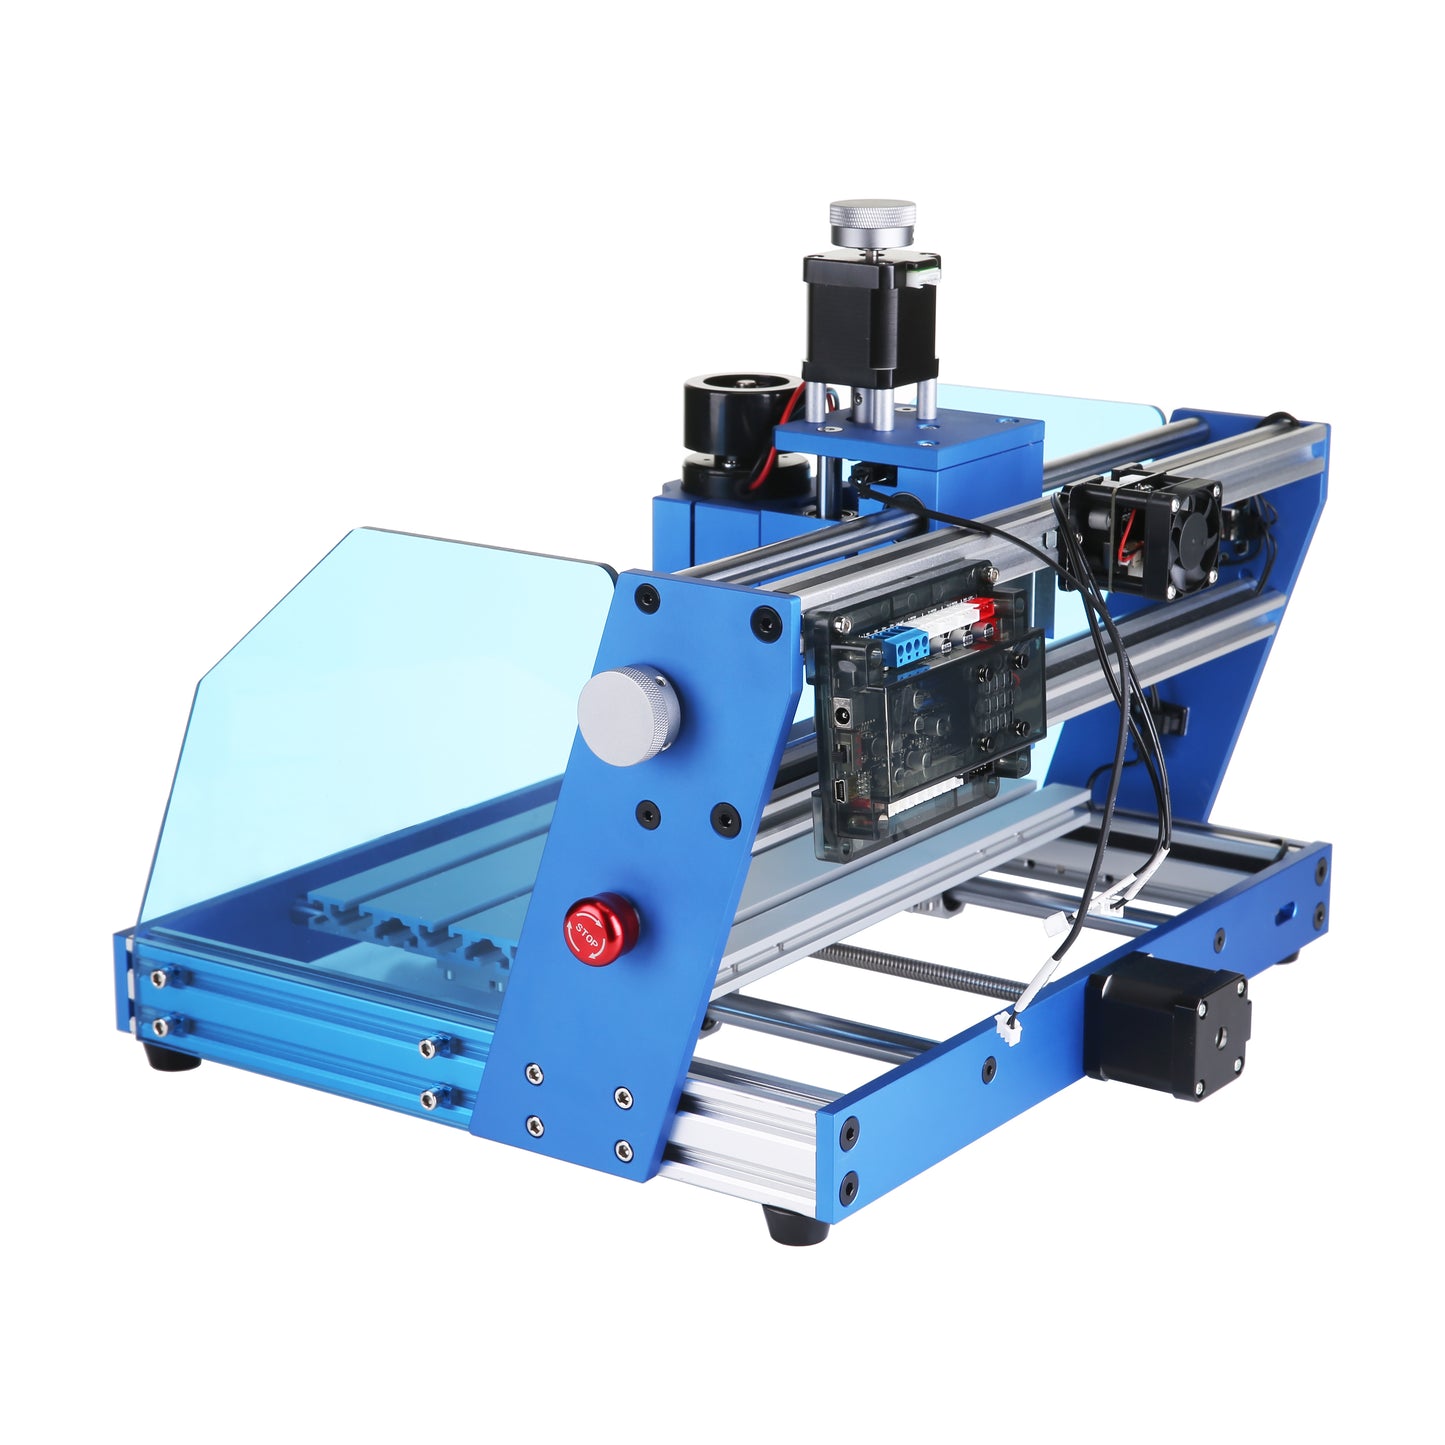 Mostics, CNC 3018 PRO MAX 2 in 1 with 5.5W Laser Module and 200w spindle, All metal frame, CNC Engraving Machine, CNC Router Machine, CNC machine